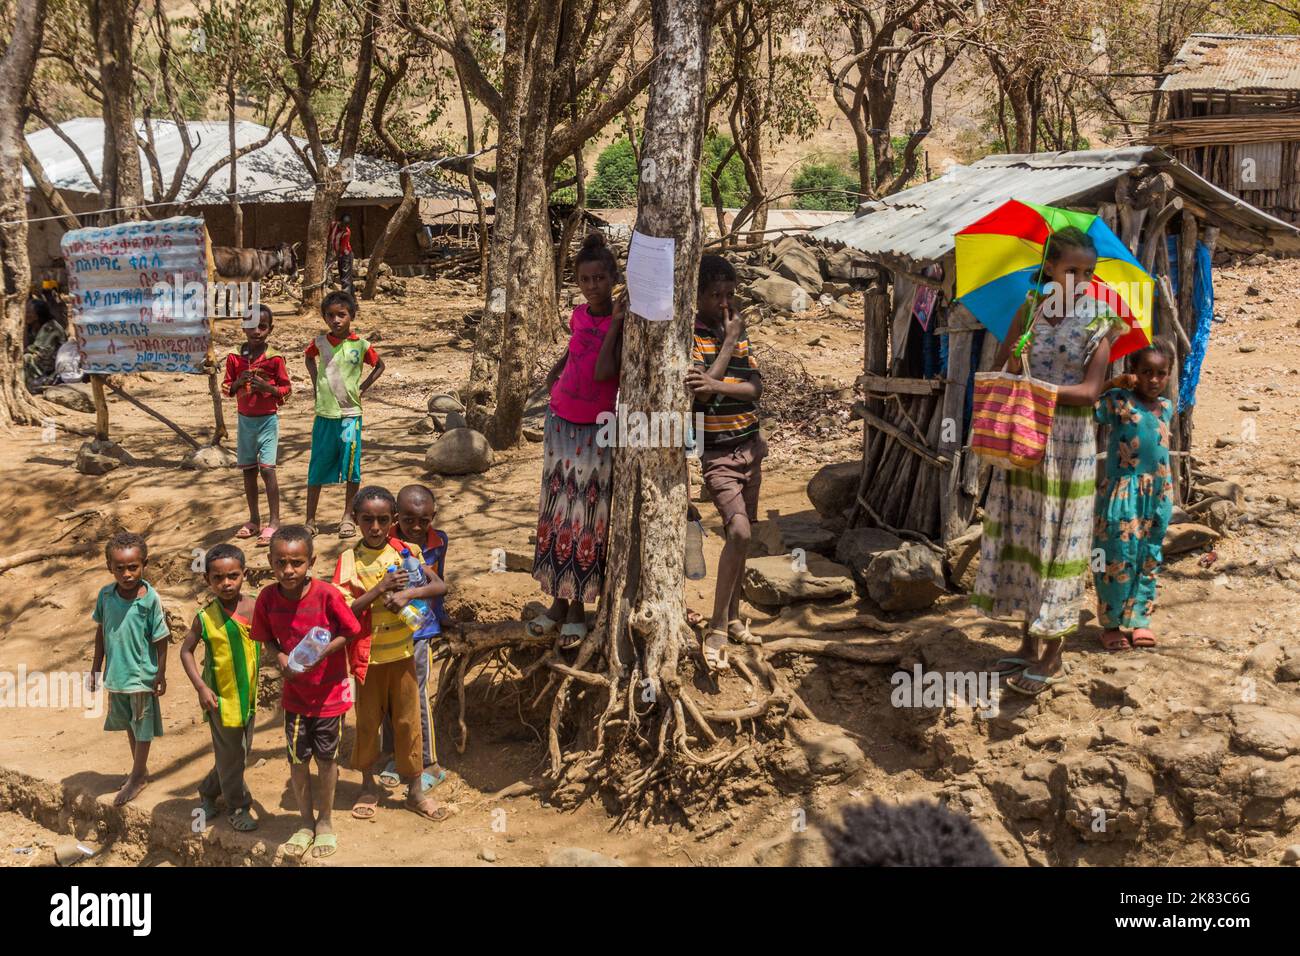 NORTHWESTERN ETHIOPIA - MARCH 18, 2019: Local people in a small village in northeastern Ethiopia Stock Photo